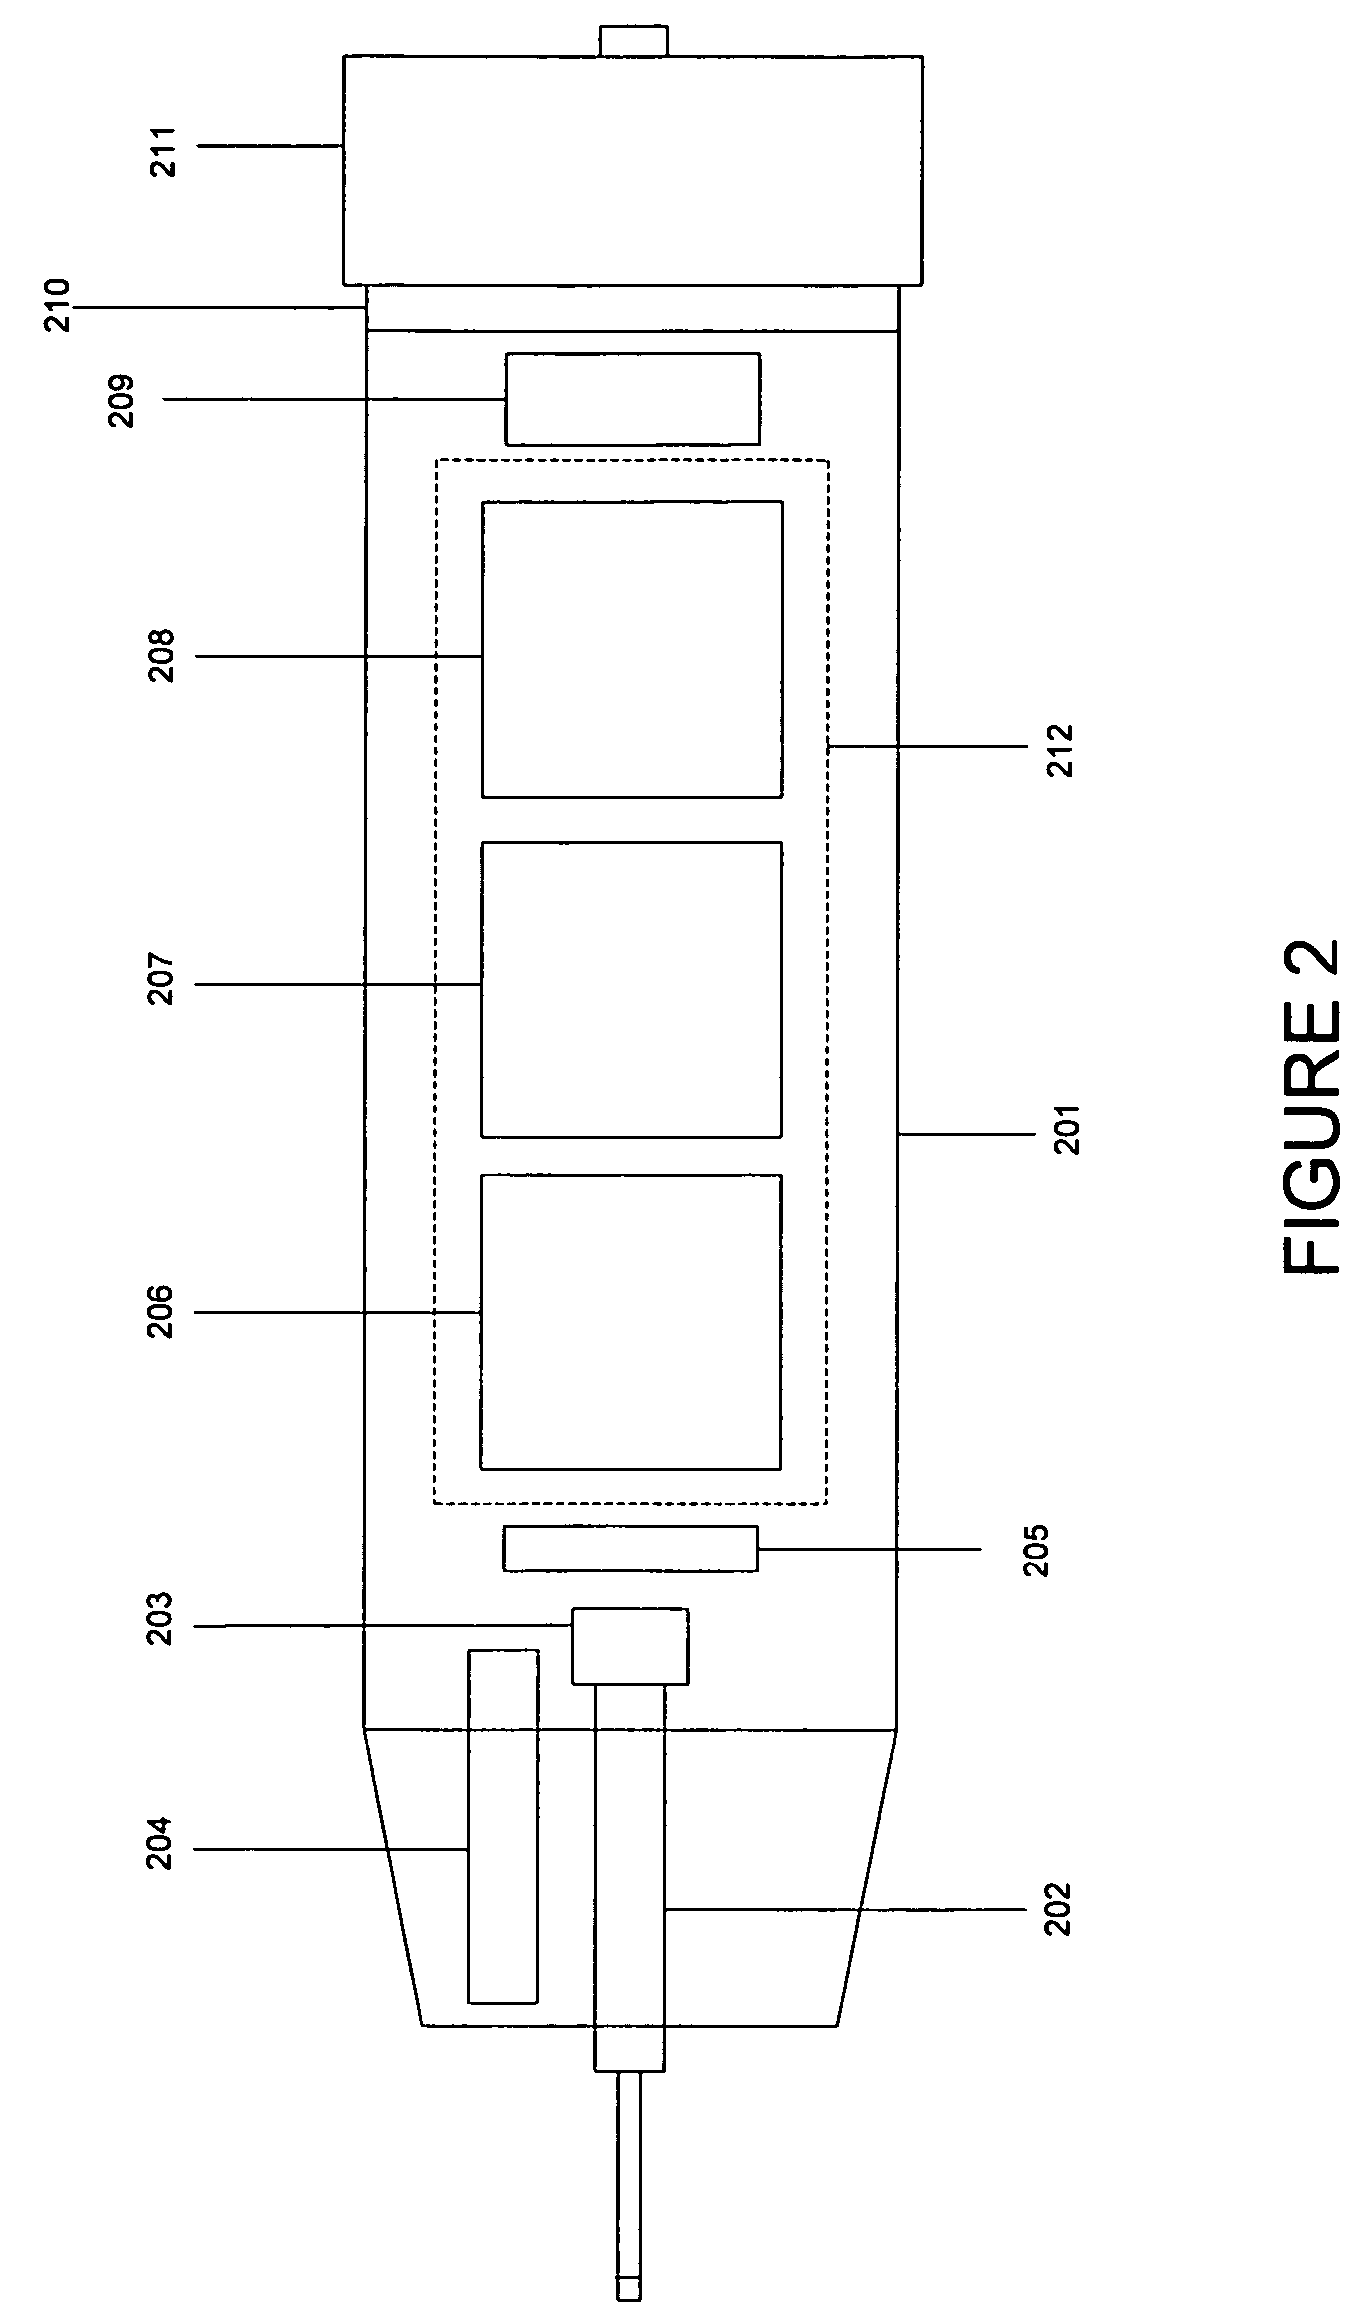 Universal computing device for surface applications